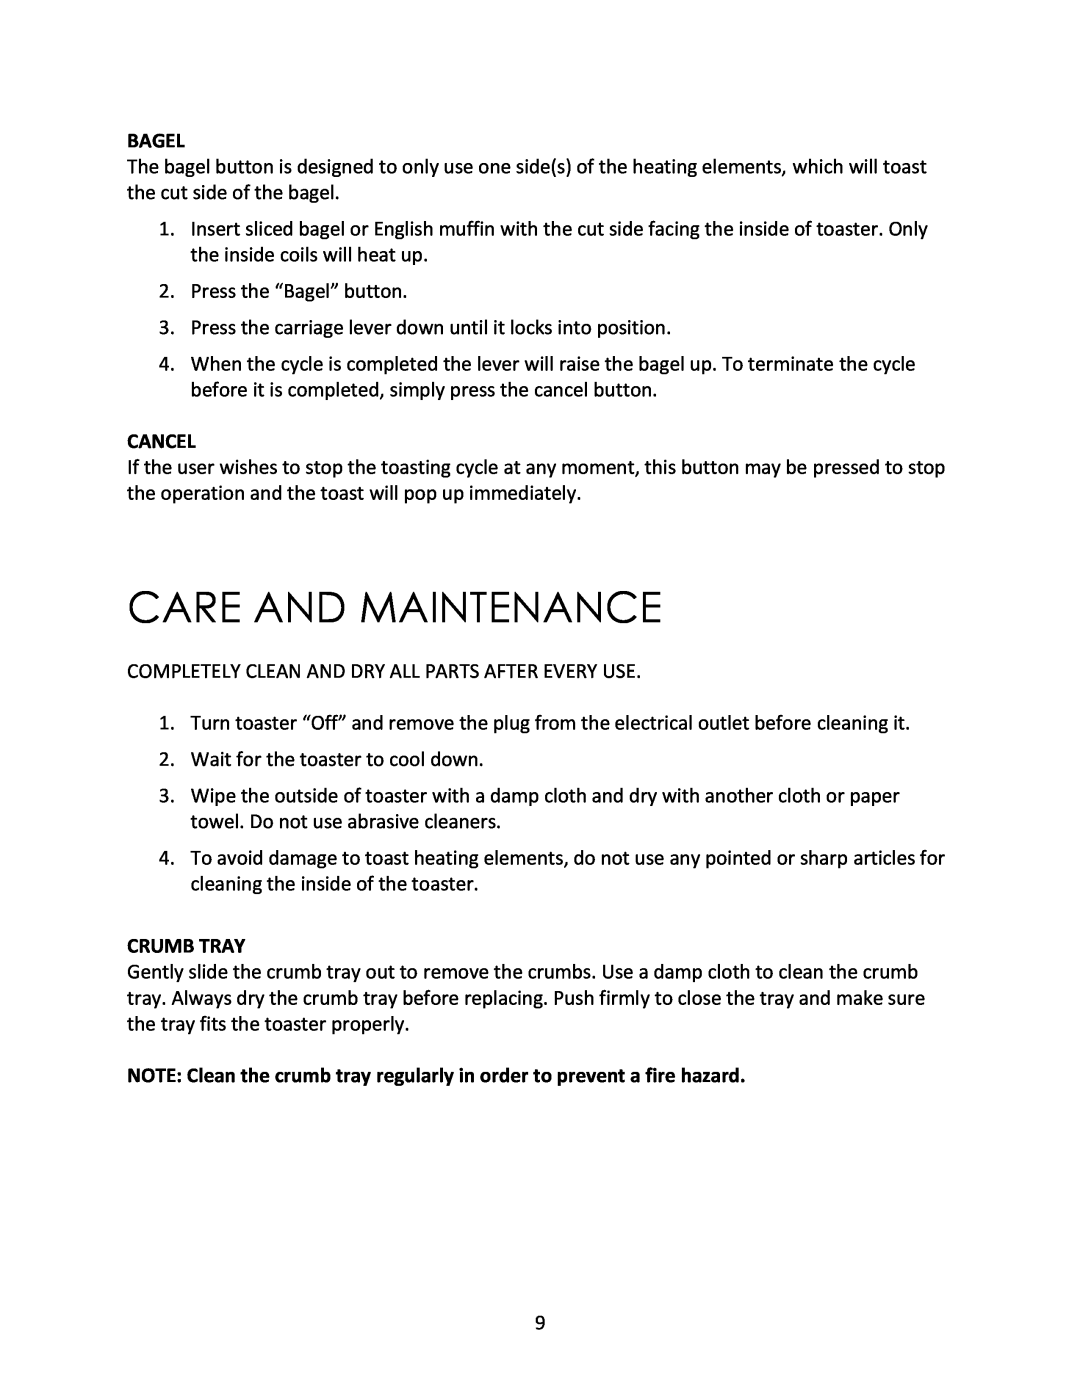 Magic Chef MCST4ST instruction manual Care And Maintenance, Bagel, Cancel, Crumb Tray 